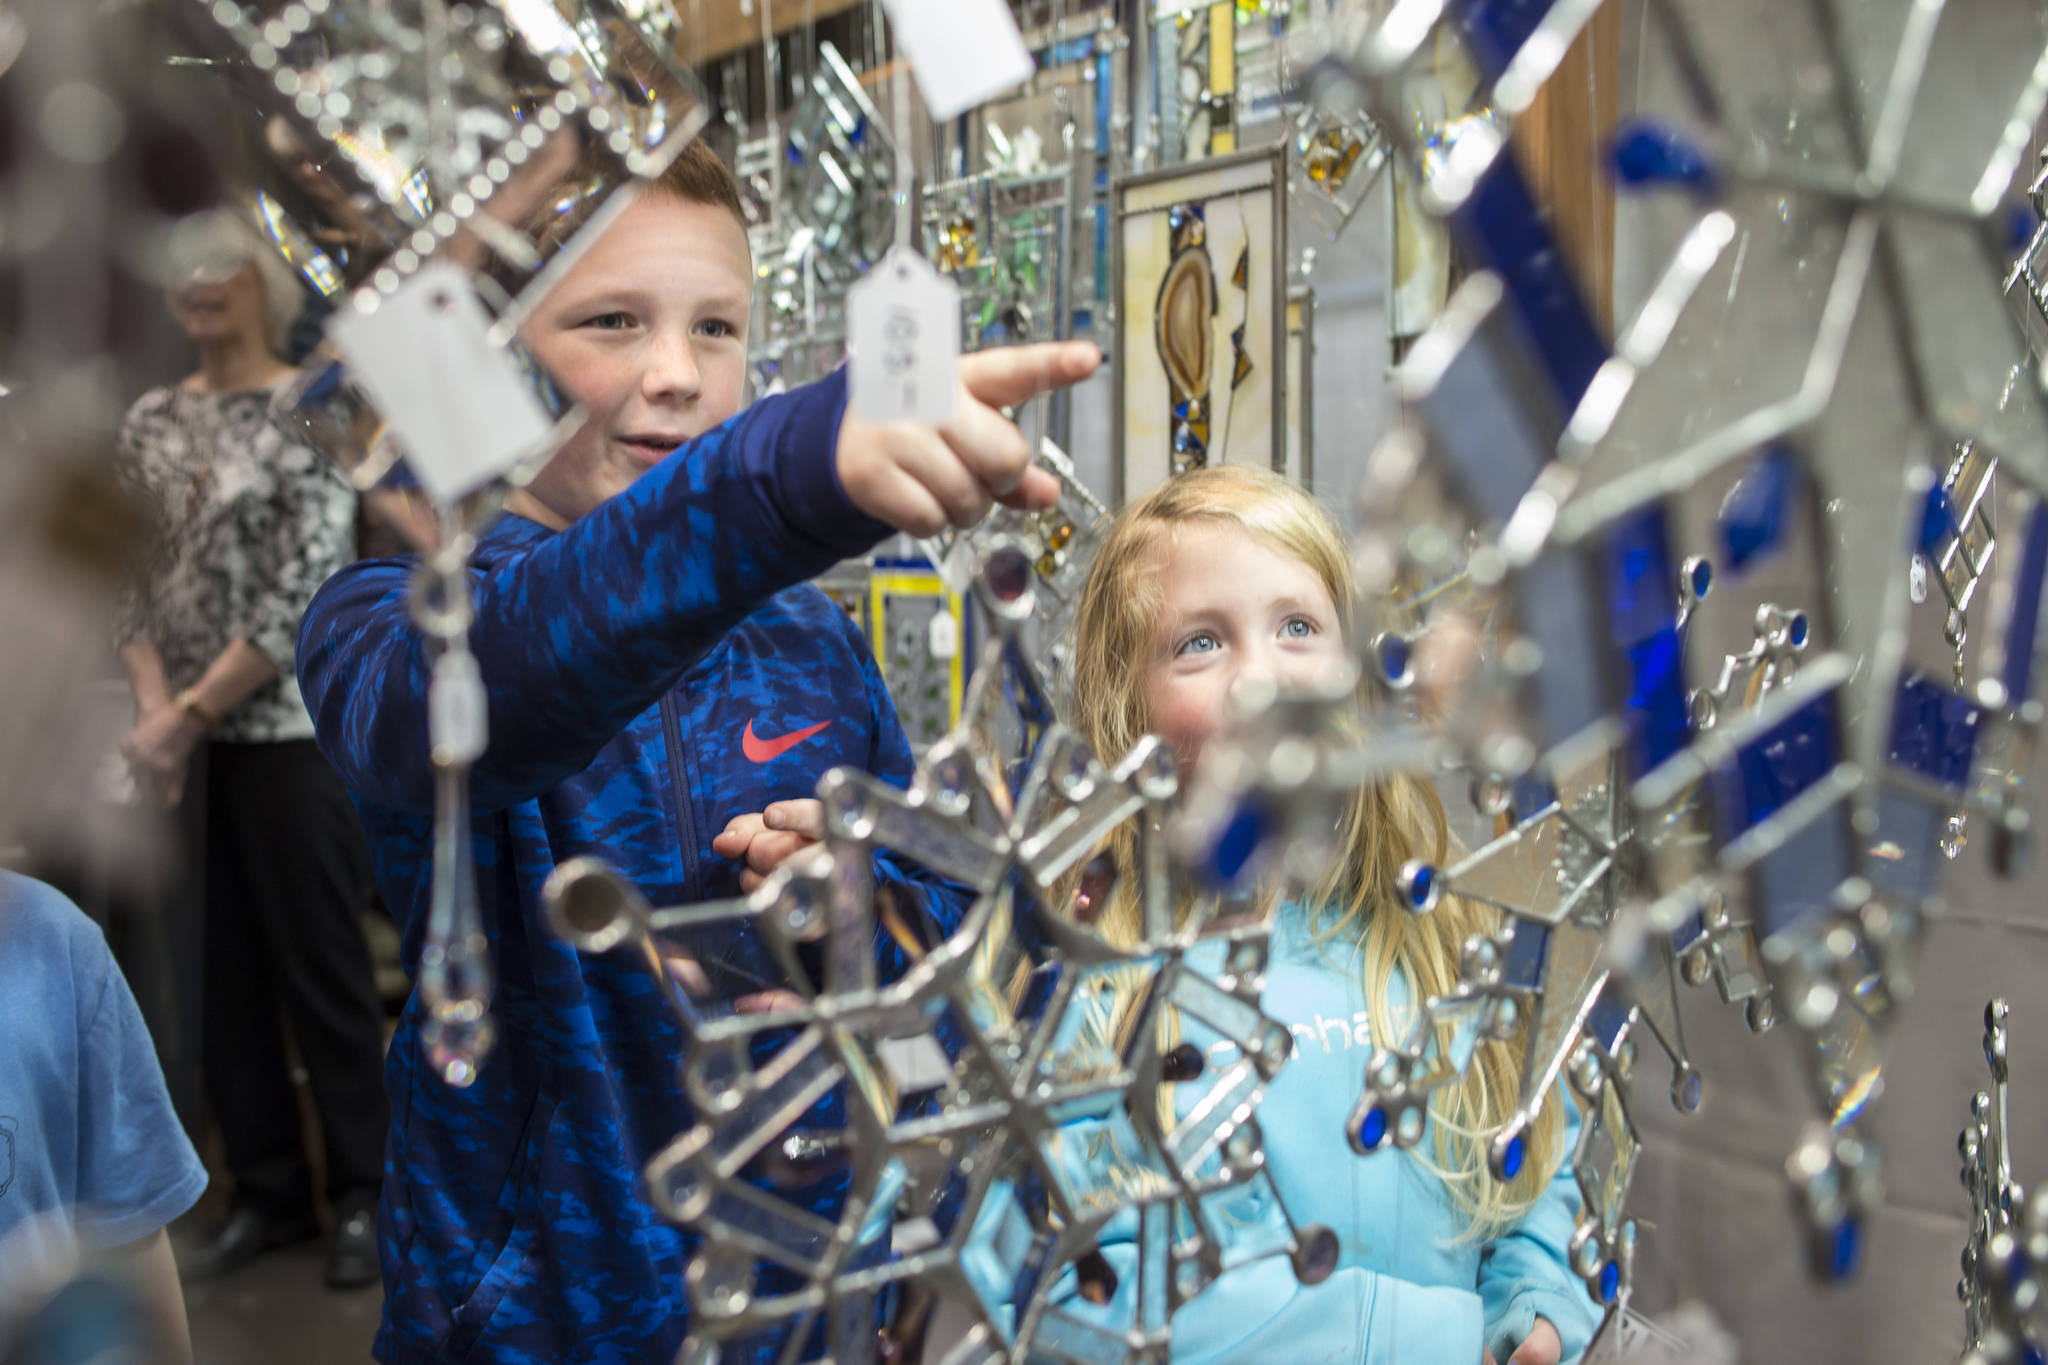 Tayt Whiteley, 8, and his sister, Delilah, 5, admire the stained glass snowflakes by Connie Nesgoda at the Public Market in Centennial Hall on Friday, Nov. 23, 2018. (Michael Penn | Juneau Empire)